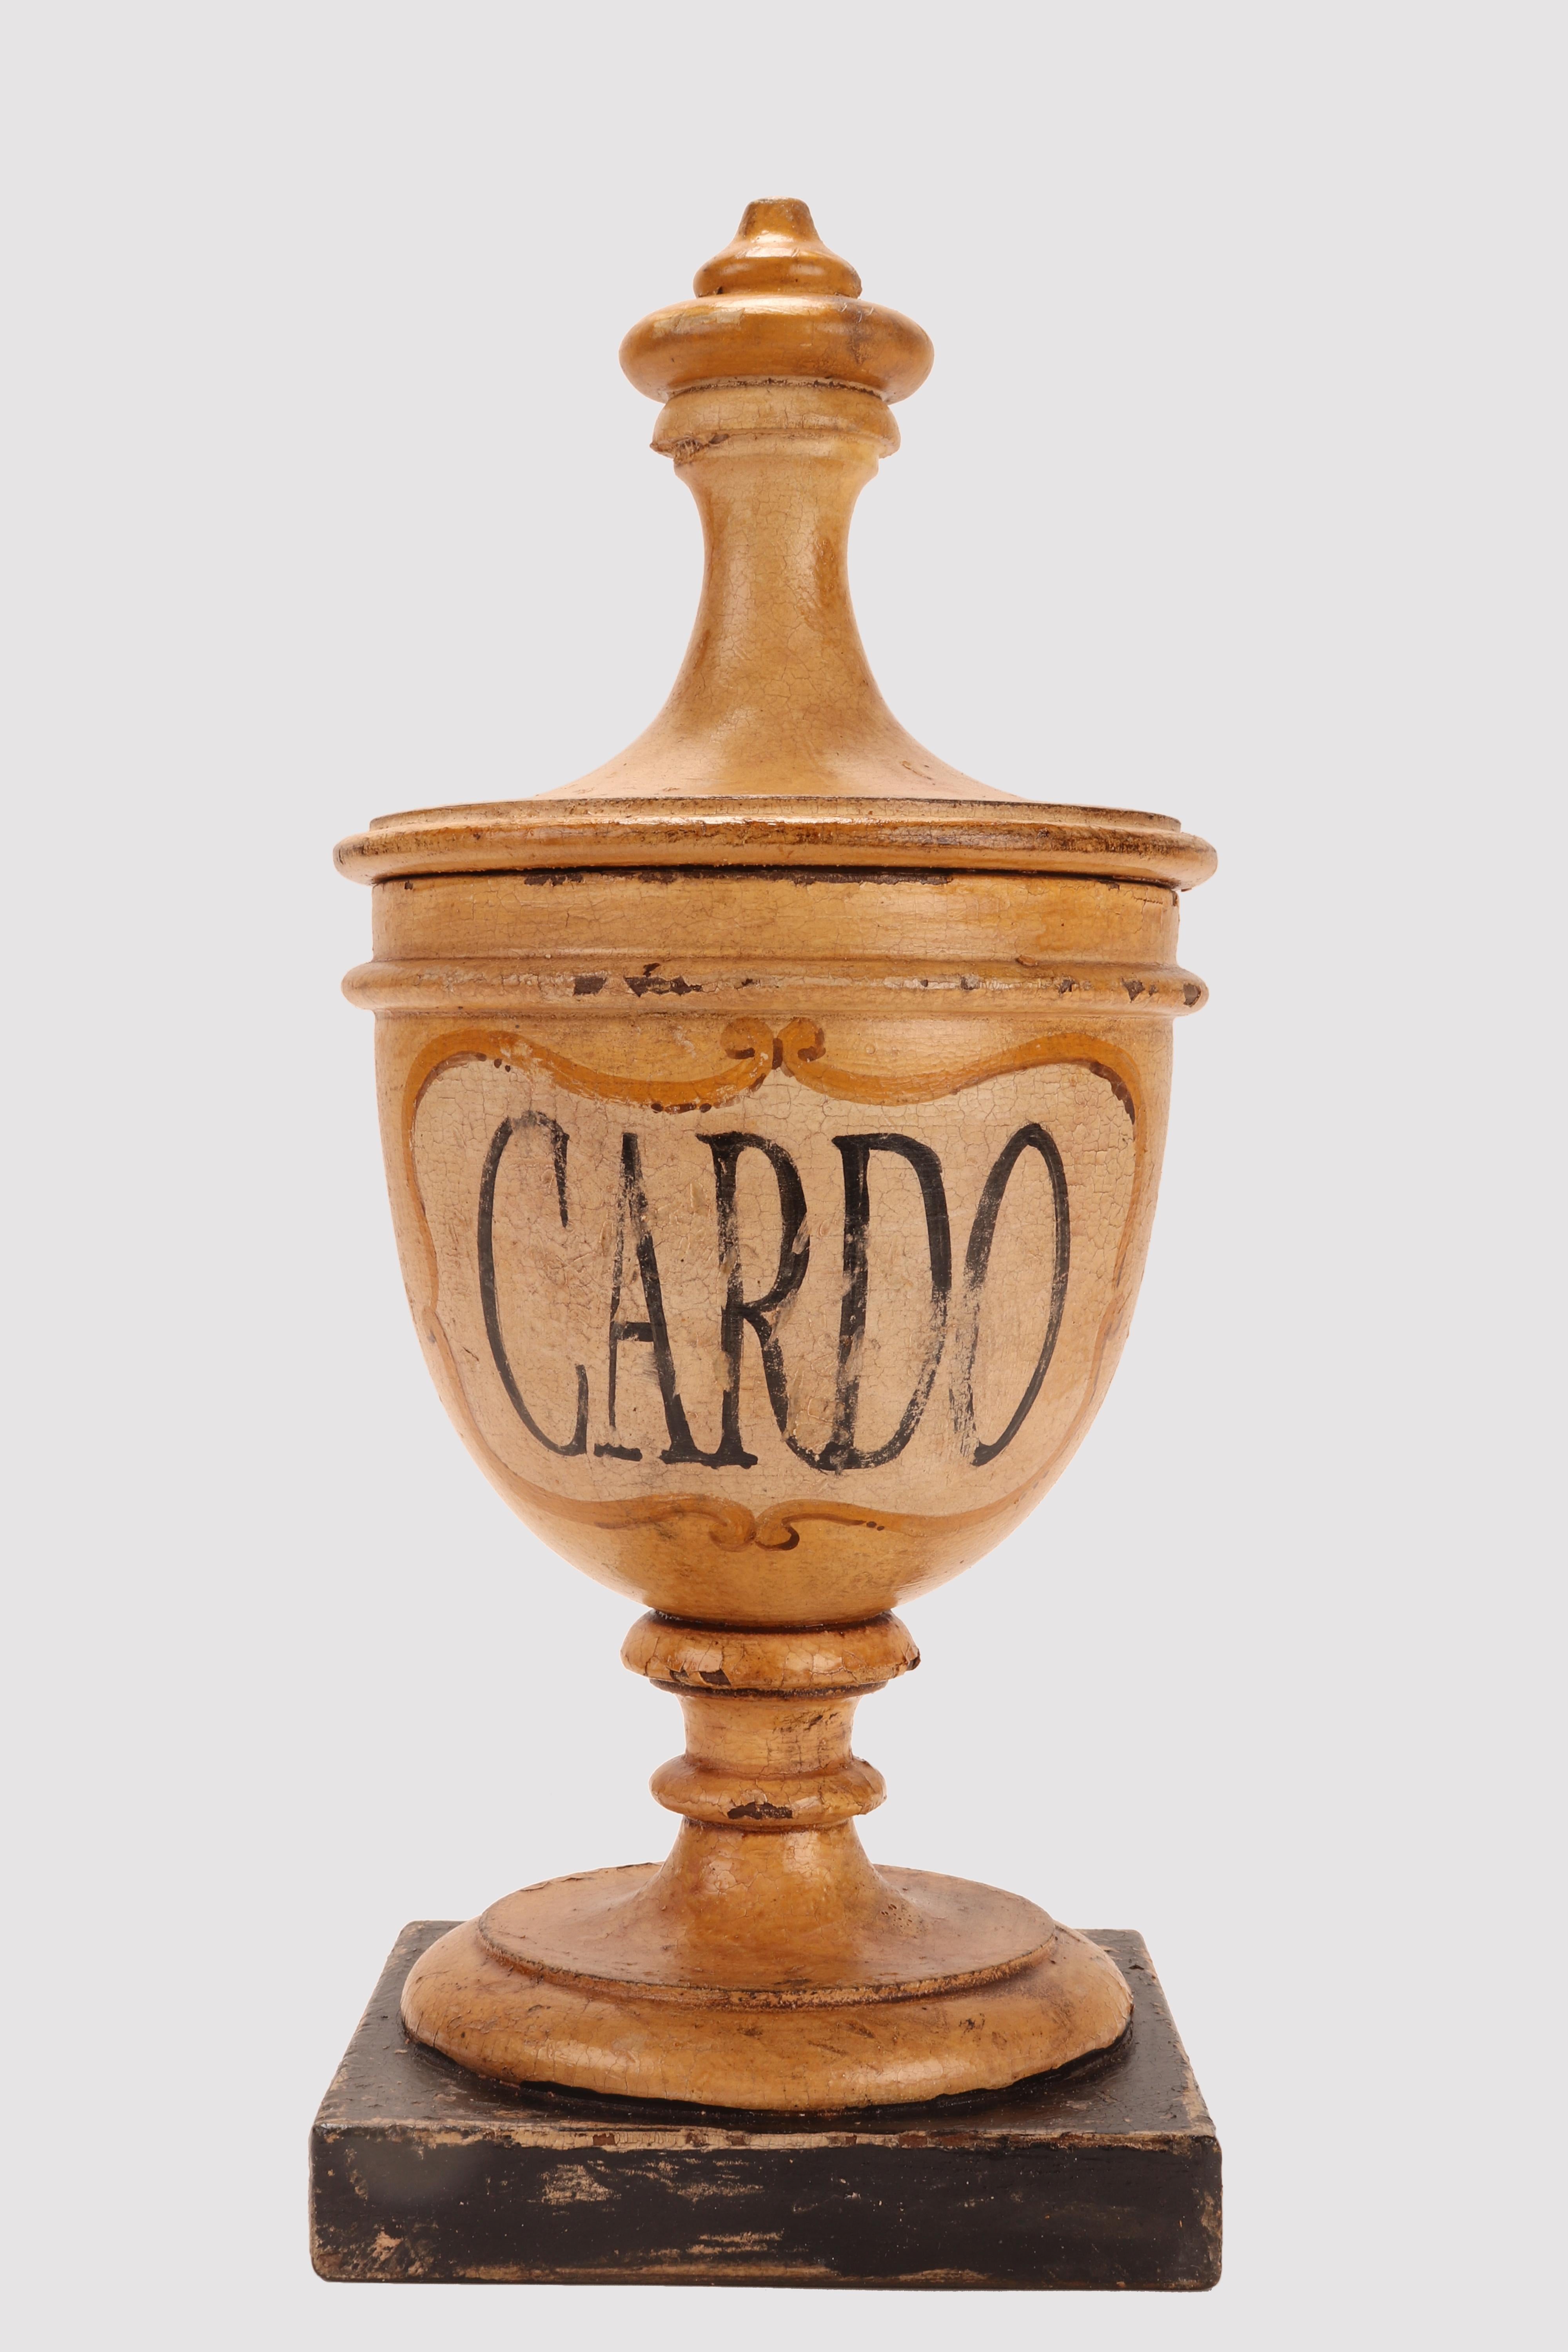 Herbalist Pharmacy Wooden Jars, Italy 1870 In Good Condition For Sale In Milan, IT